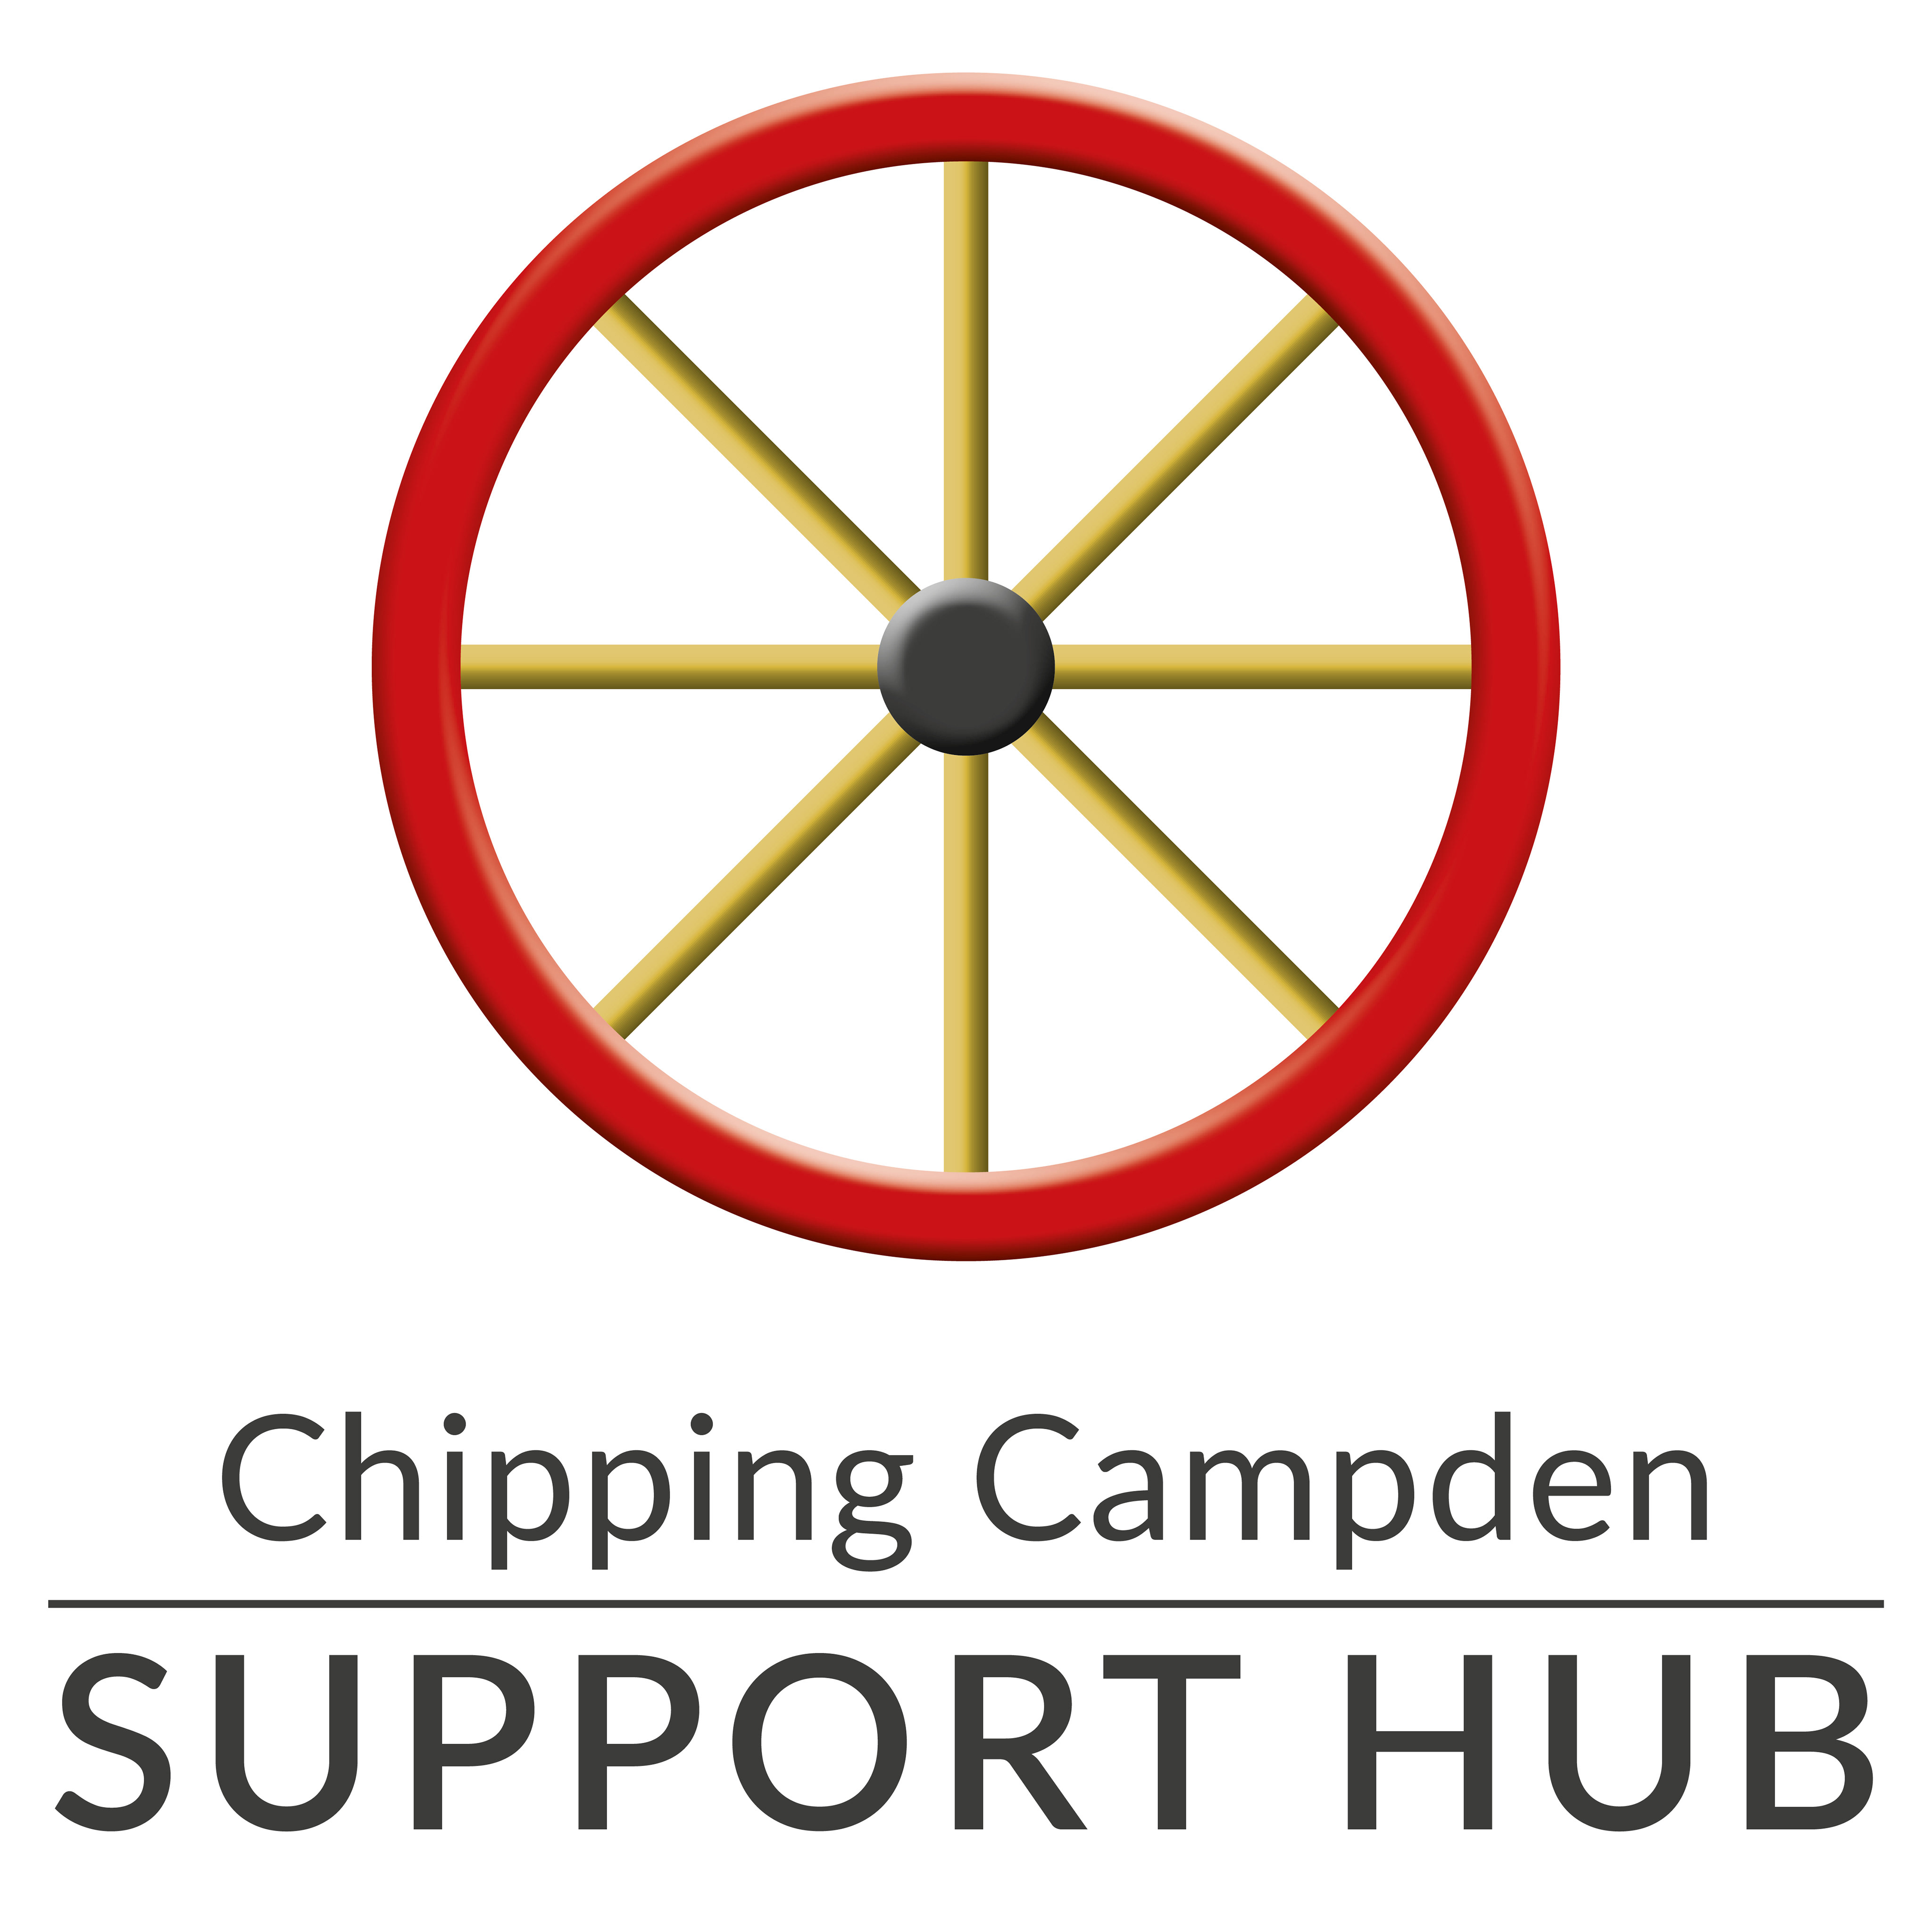 Chipping Campden Support Hub